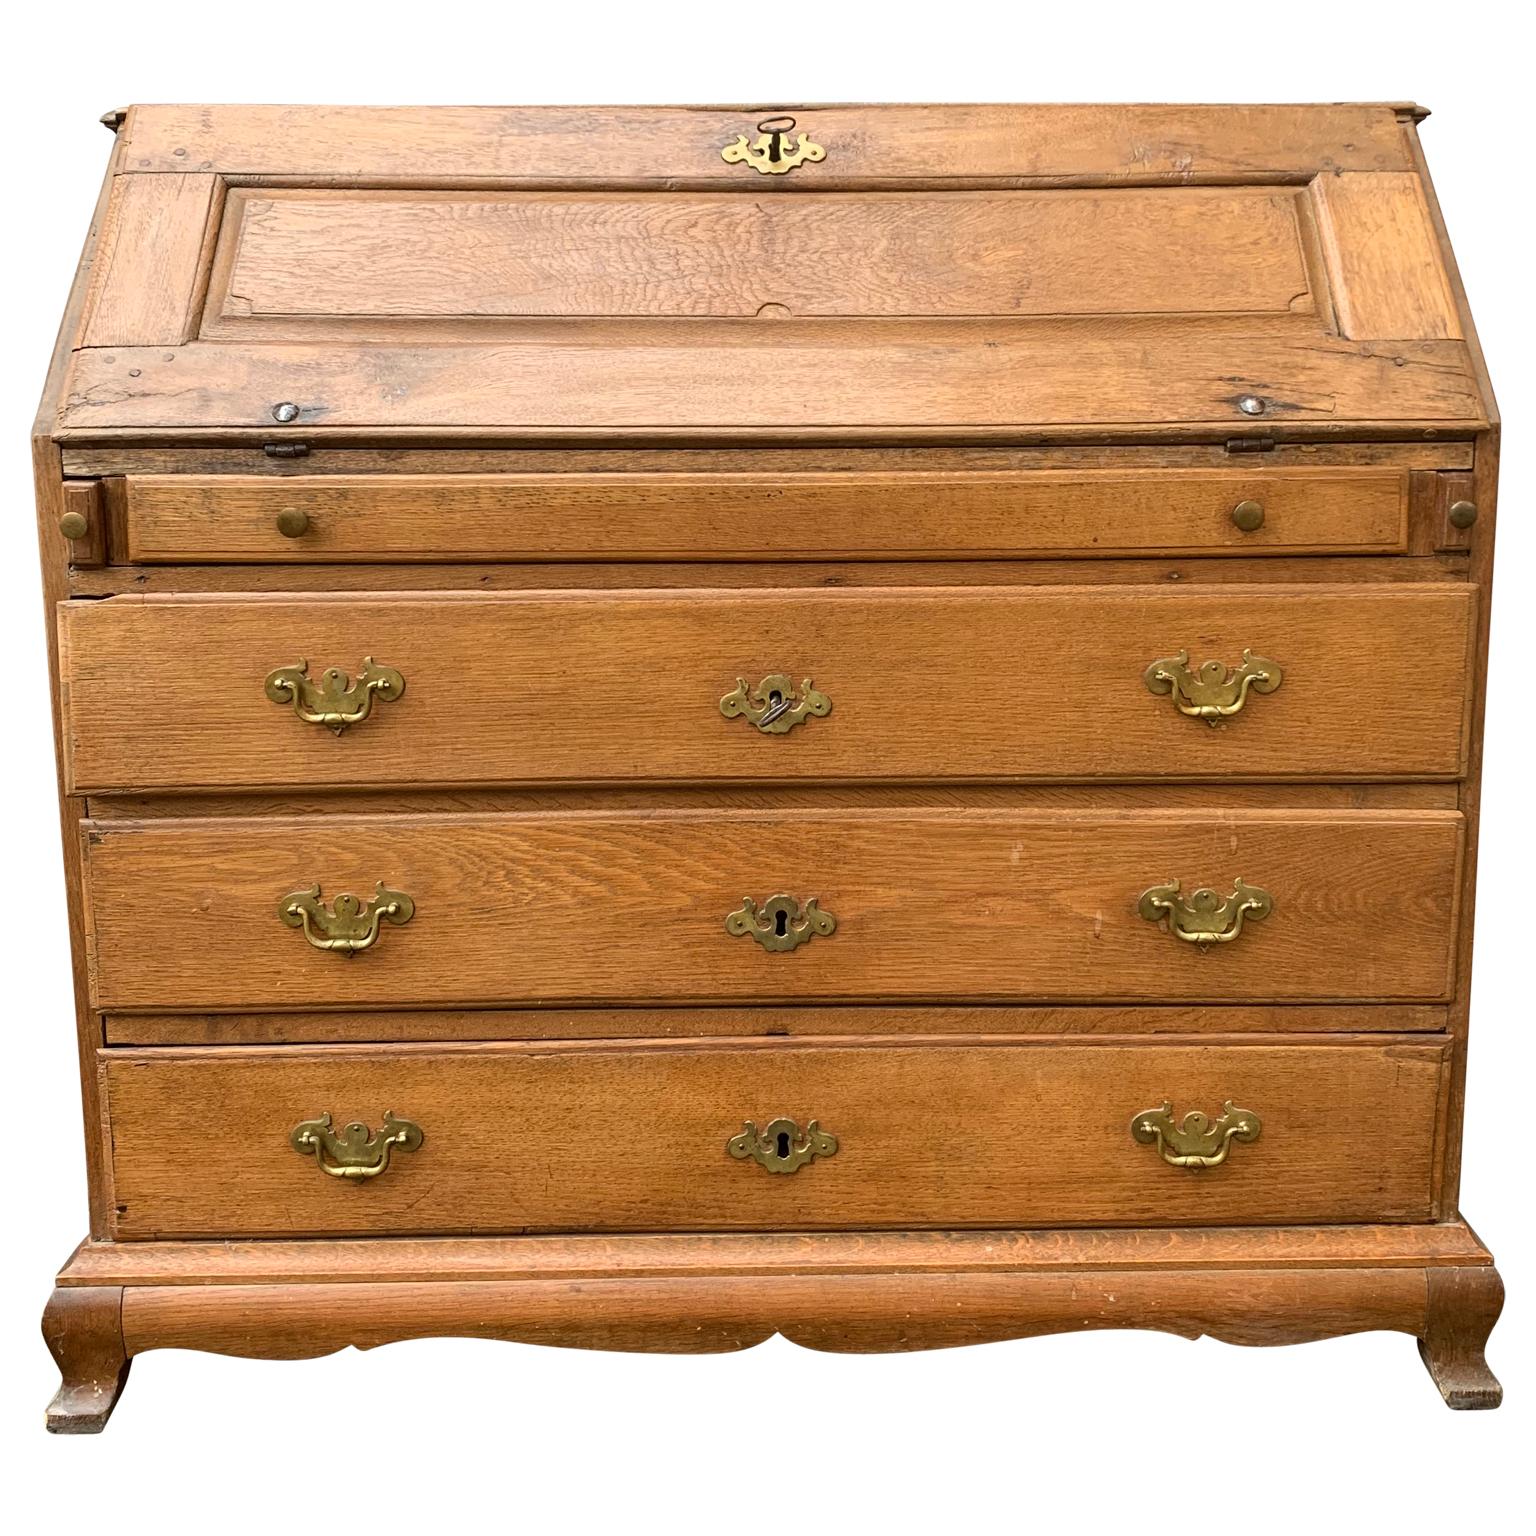 Danish 18th Century 4-drawer chest and writing desk with drop down top and a series of small drawers inside. Antique brass hardware and original locks and 3 keys.

Included is the original September 1940 invoice from when the Swedish owner bought